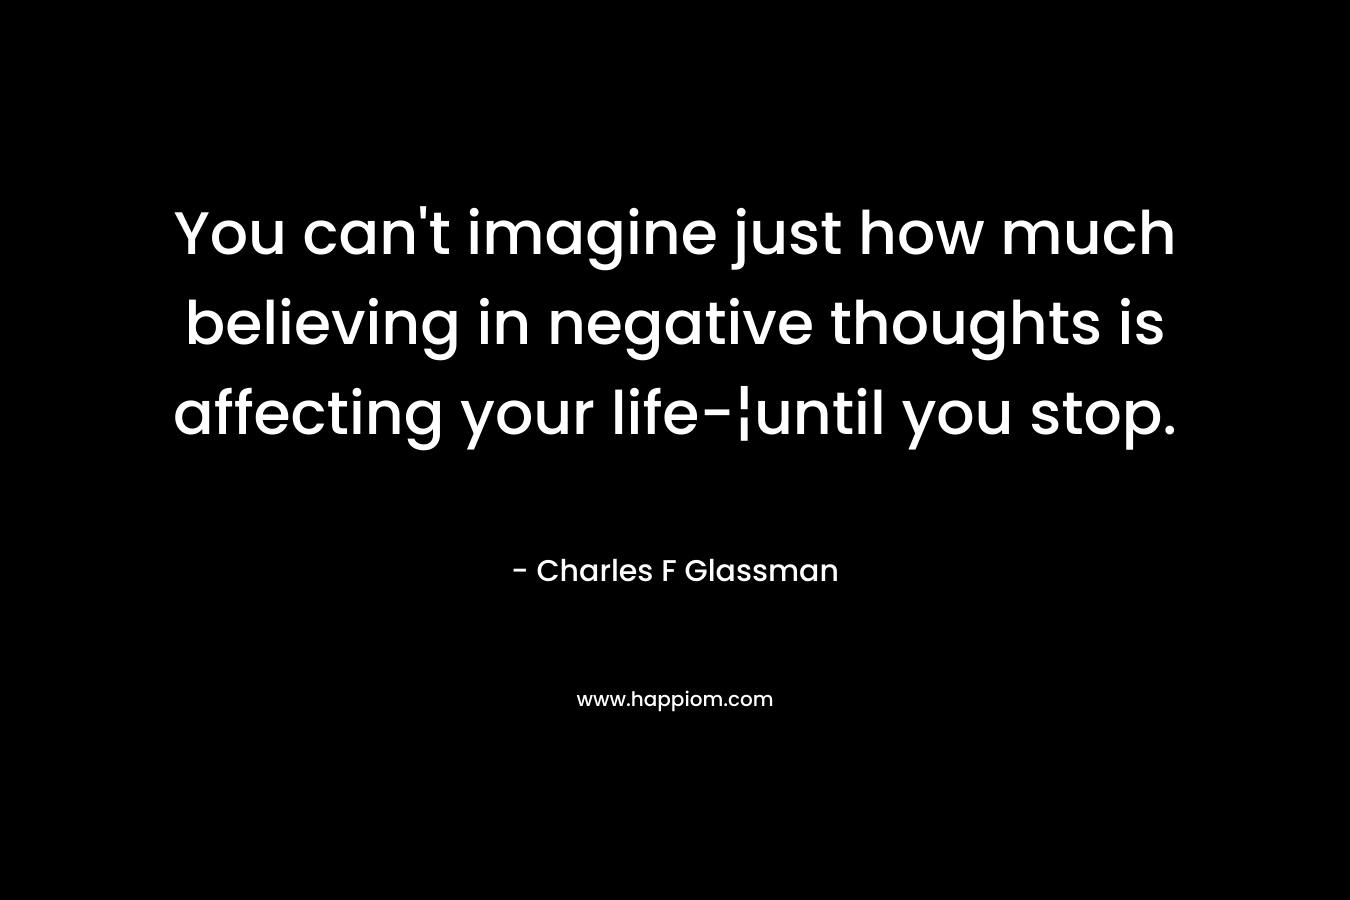 You can't imagine just how much believing in negative thoughts is affecting your life-¦until you stop.